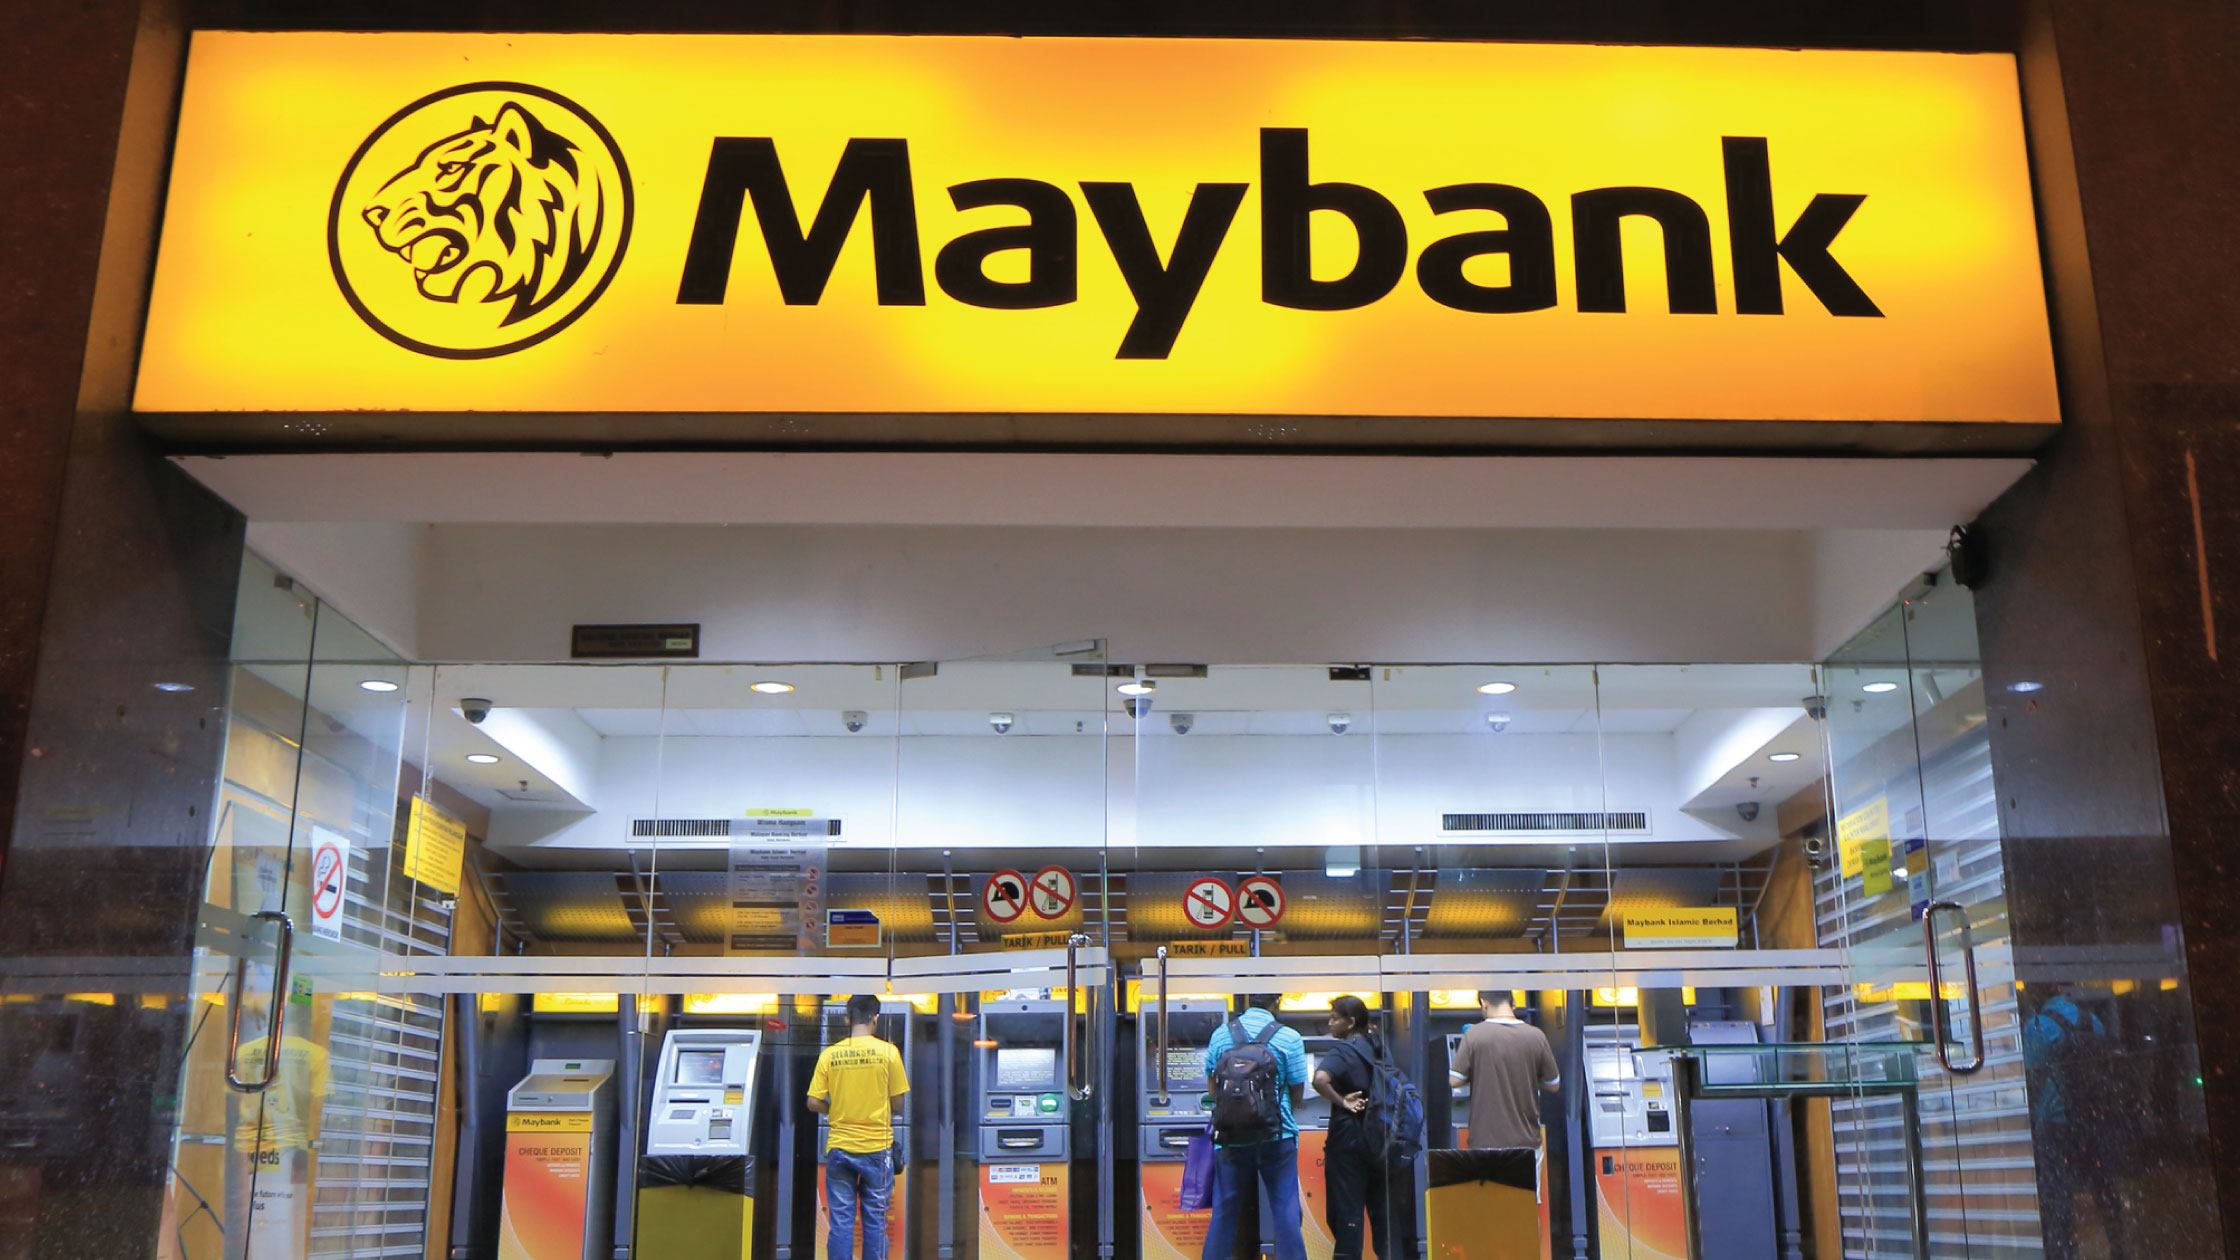 Preferred stock broker view: Malay Bank Q4 revenue expected to be stronger, maintain overweight